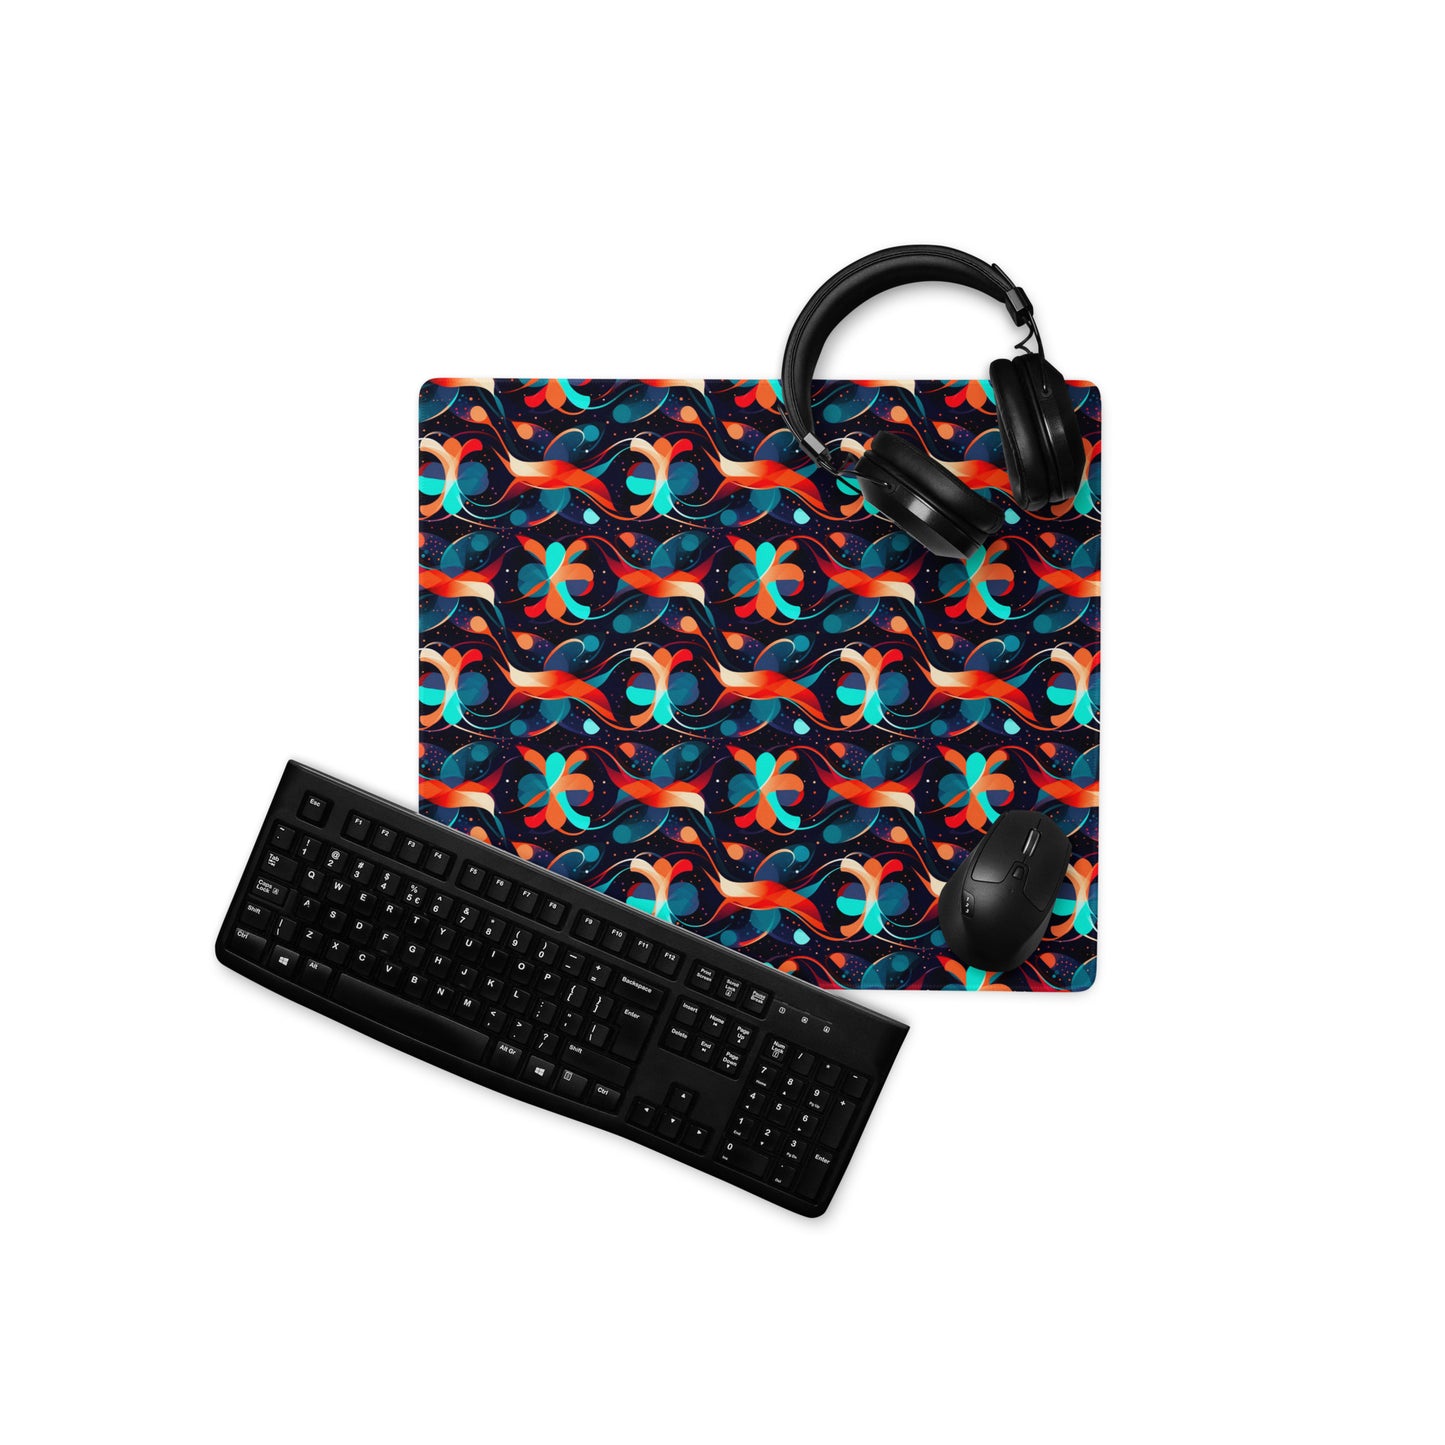 A 18" x 16" desk pad with a wavy orange and blue pattern. With a keyboard, mouse, and headphones sitting on it.